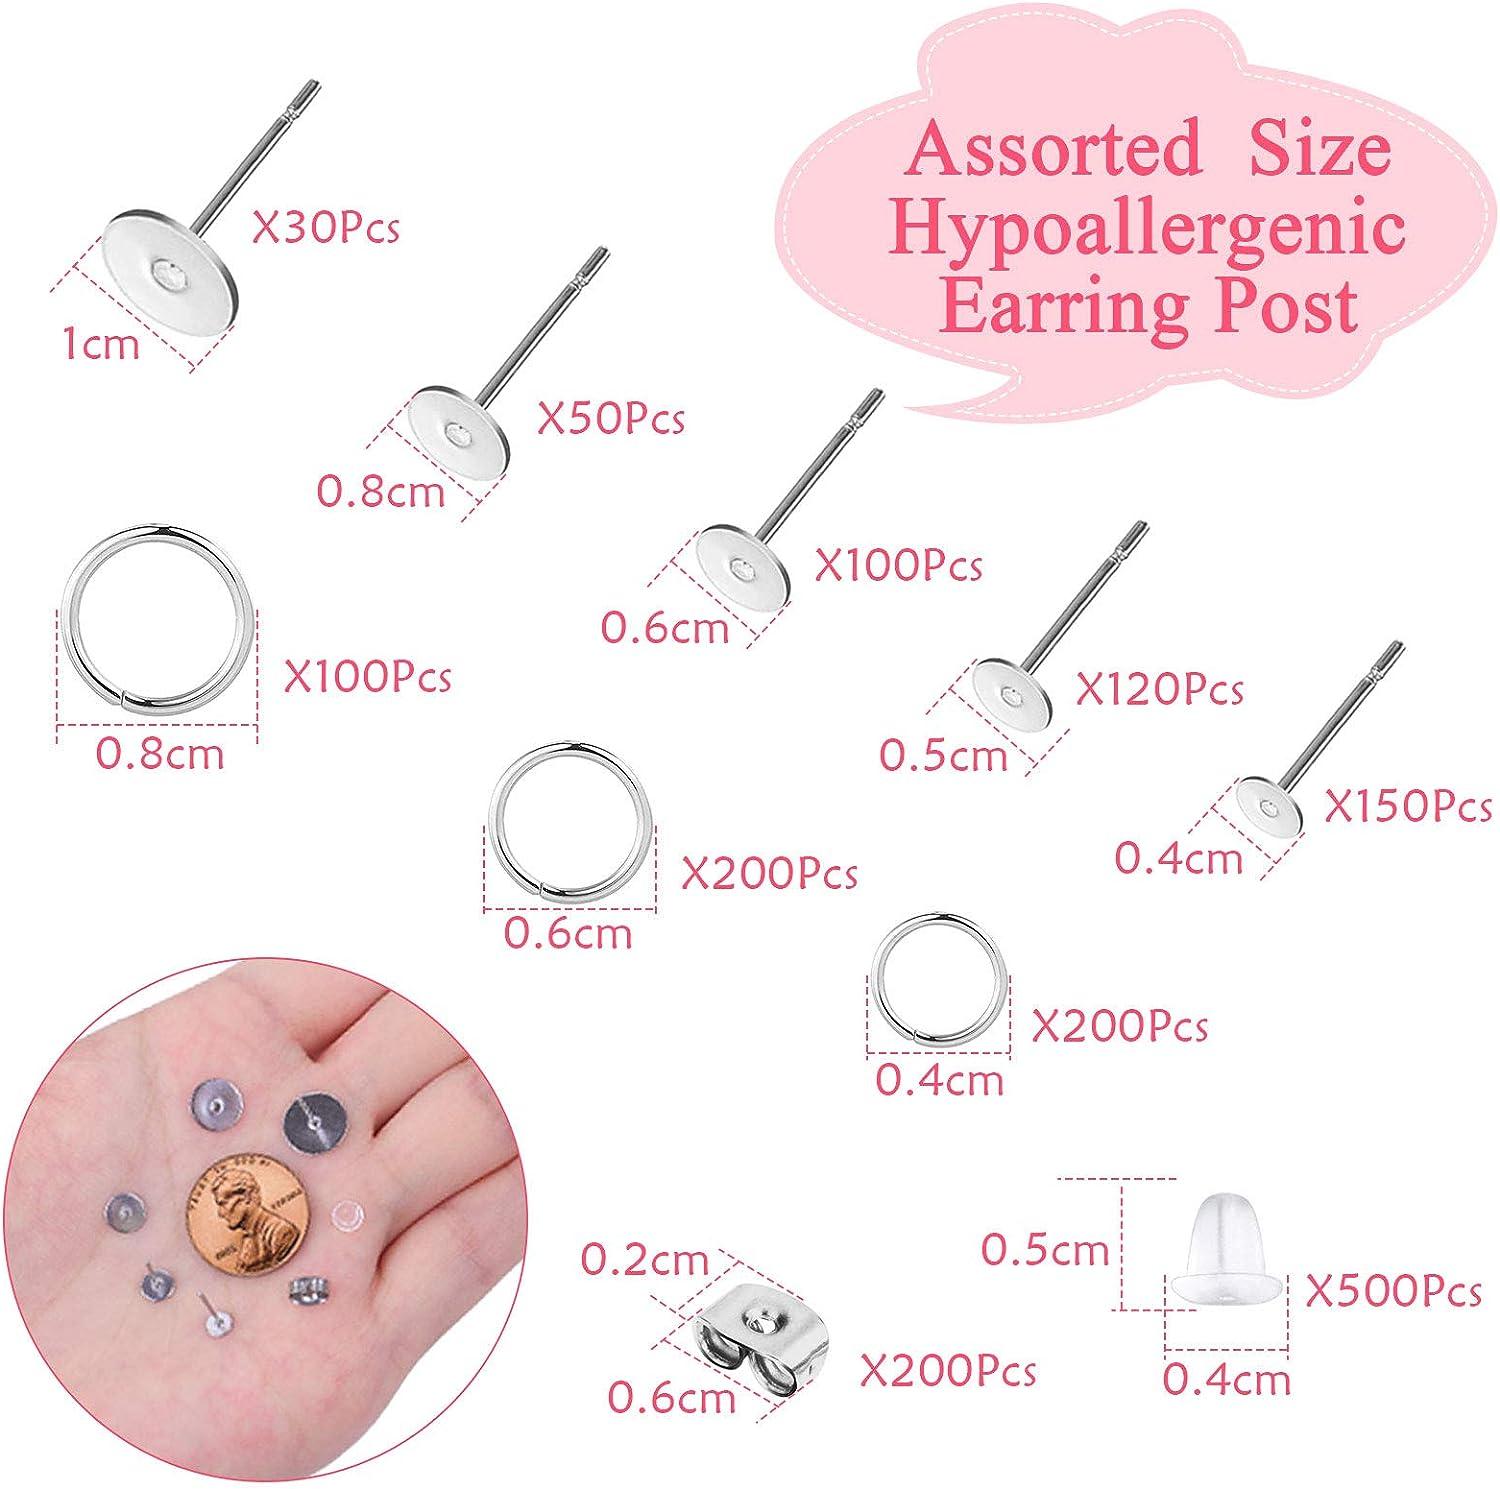 450PCS Gold Earring Posts and Backs,Hypoallergenic Earring Studs